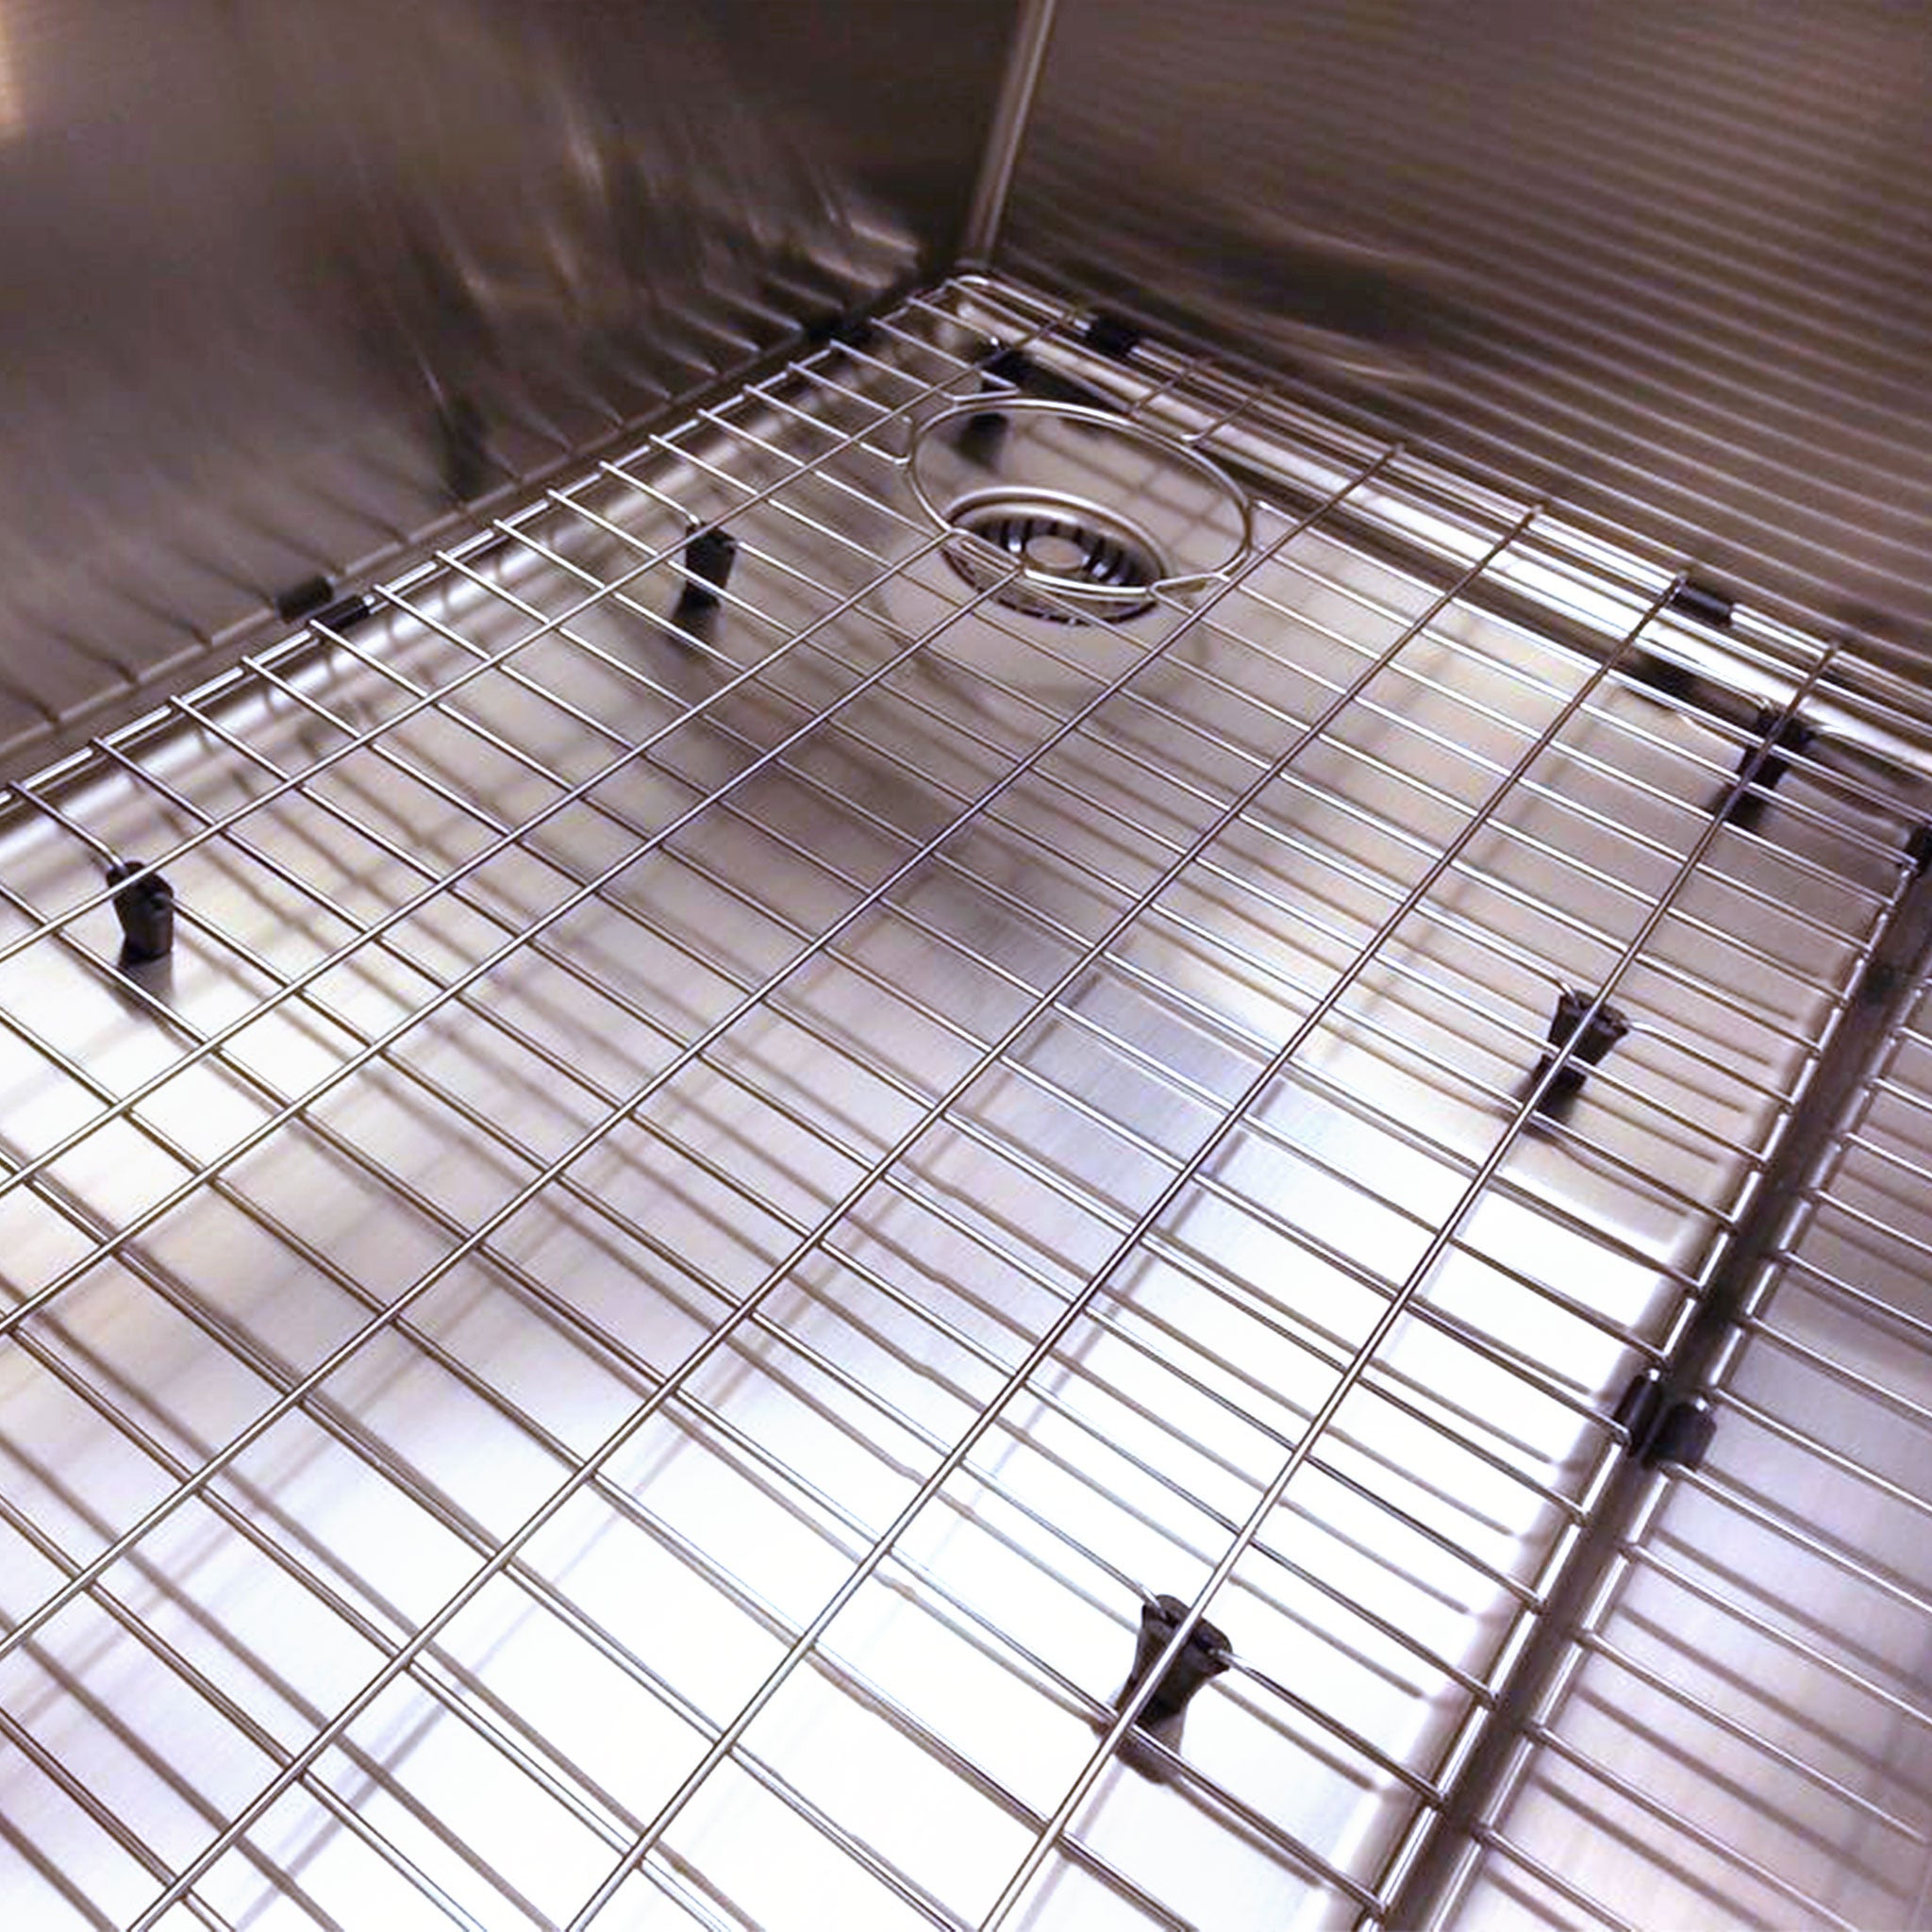 GRID 37" stainless steel sink grid - right drain